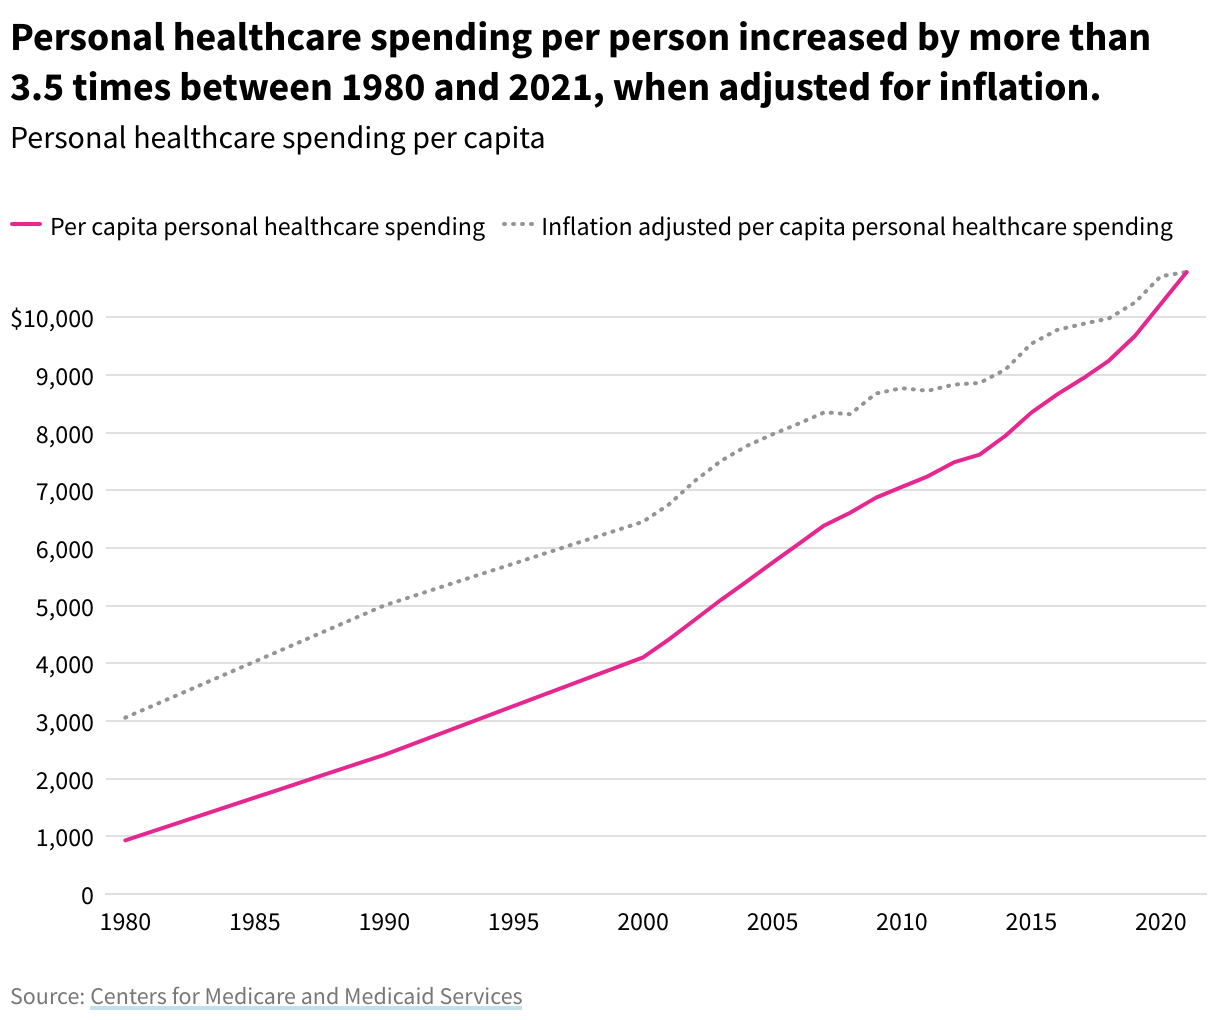 Line chart comparing per capita personal healthcare spending and inflation adjusted per capita personal healthcare spending. Personal healthcare spending per person increased by more than 3.5 times between 1980 and 2021, when adjusted for inflation.